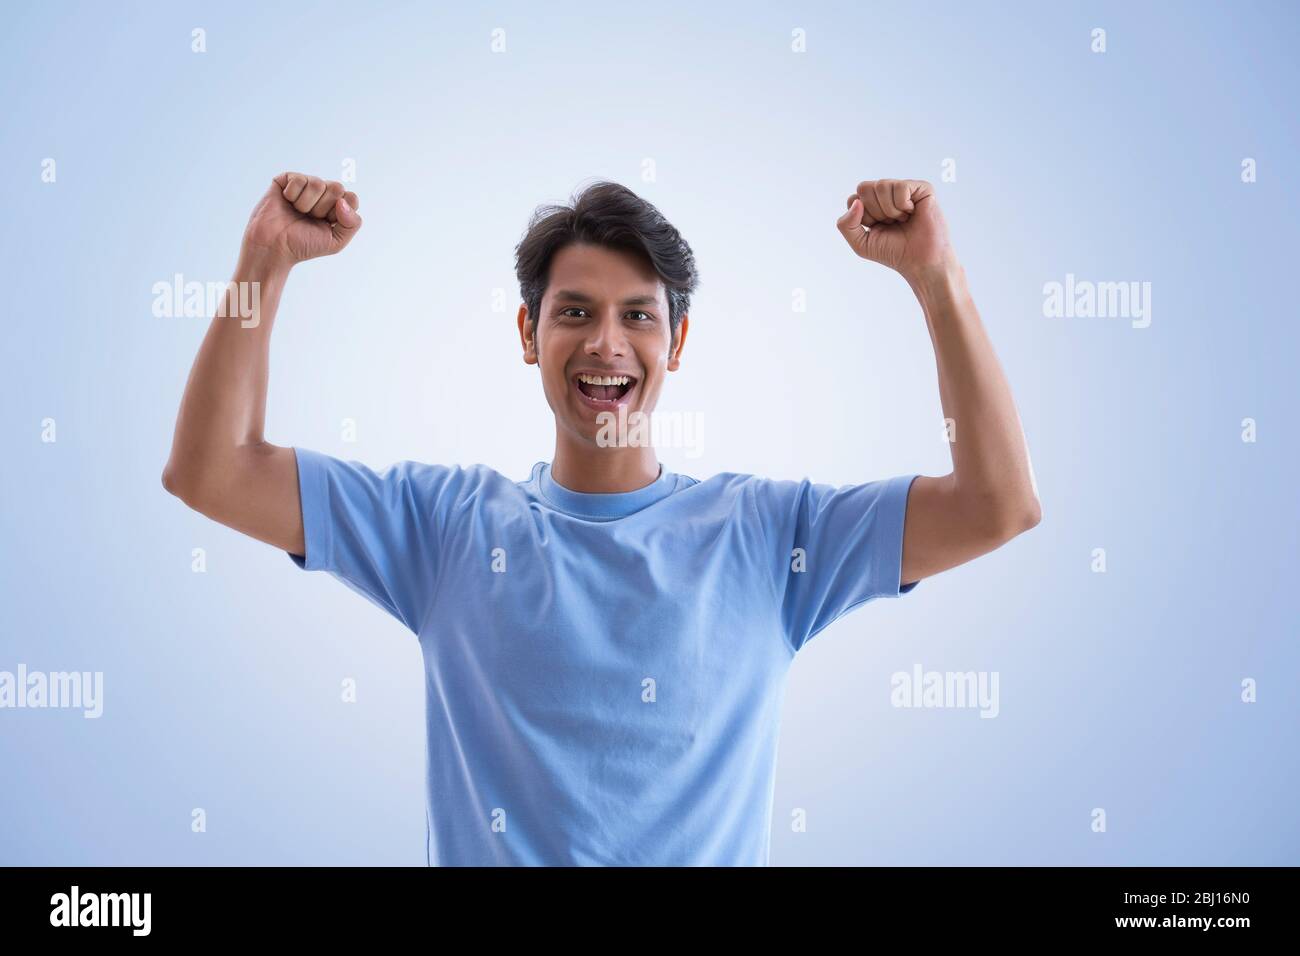 young man clenching fists and cheering Stock Photo